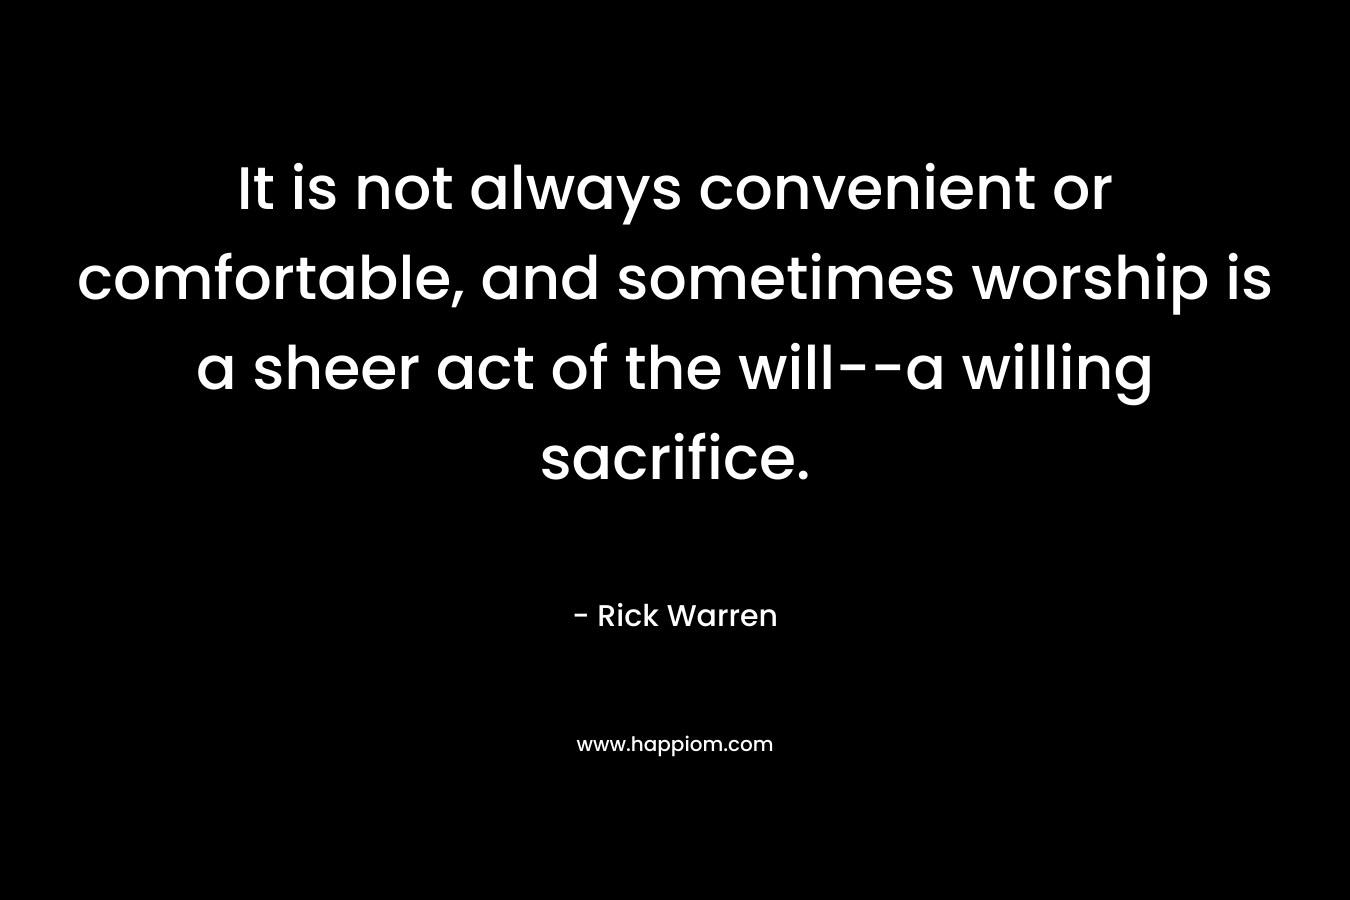 It is not always convenient or comfortable, and sometimes worship is a sheer act of the will–a willing sacrifice. – Rick Warren